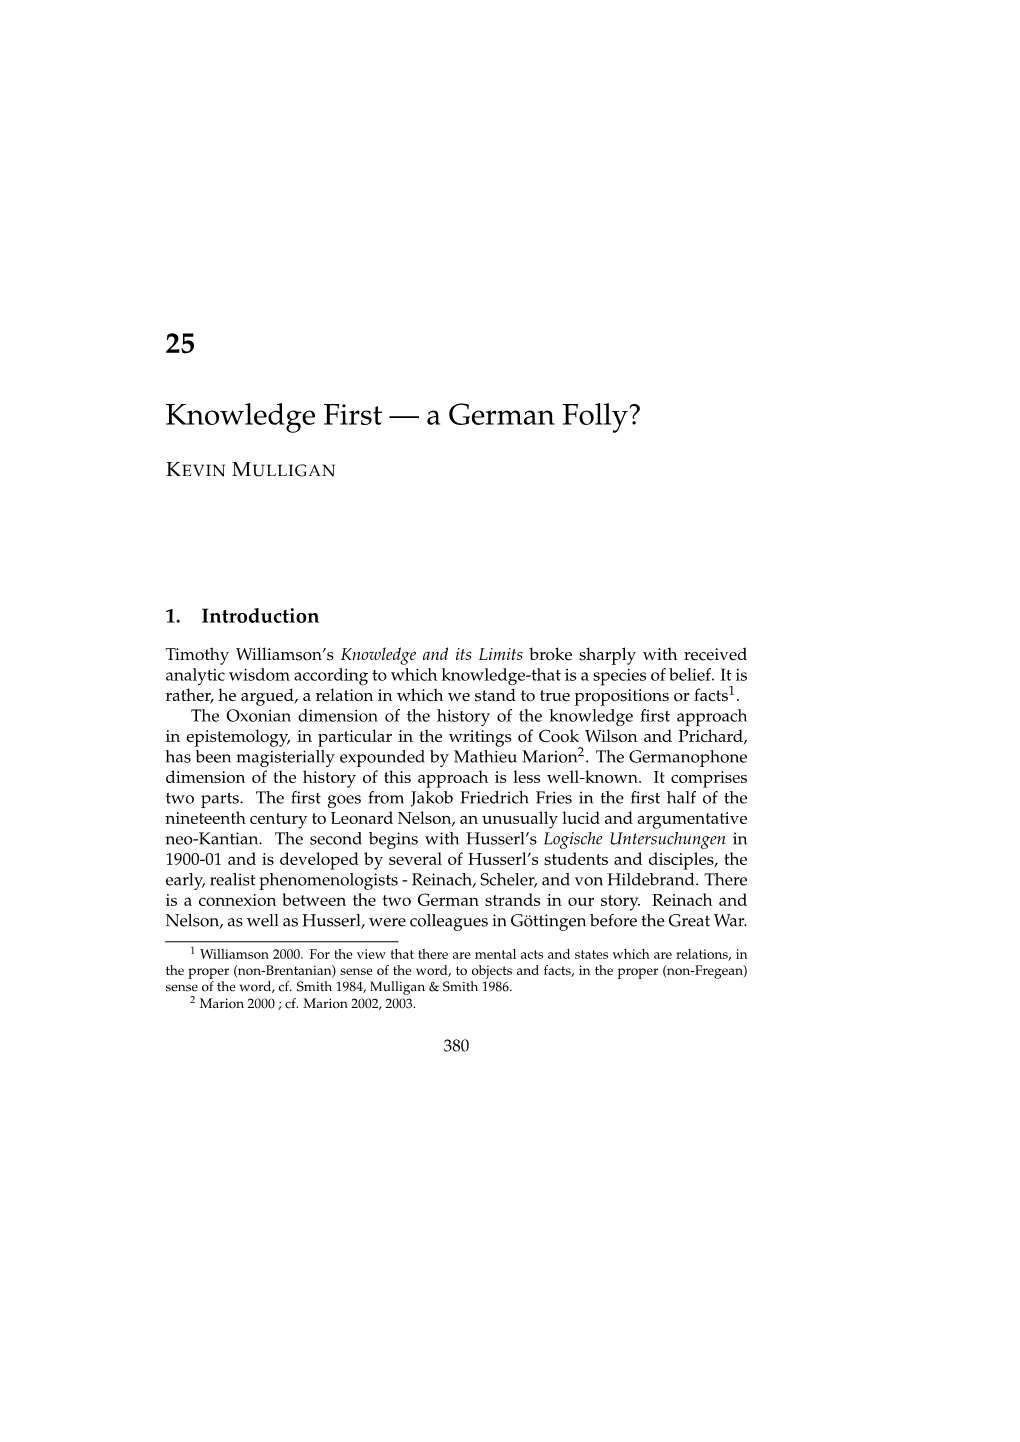 Knowledge First — a German Folly?